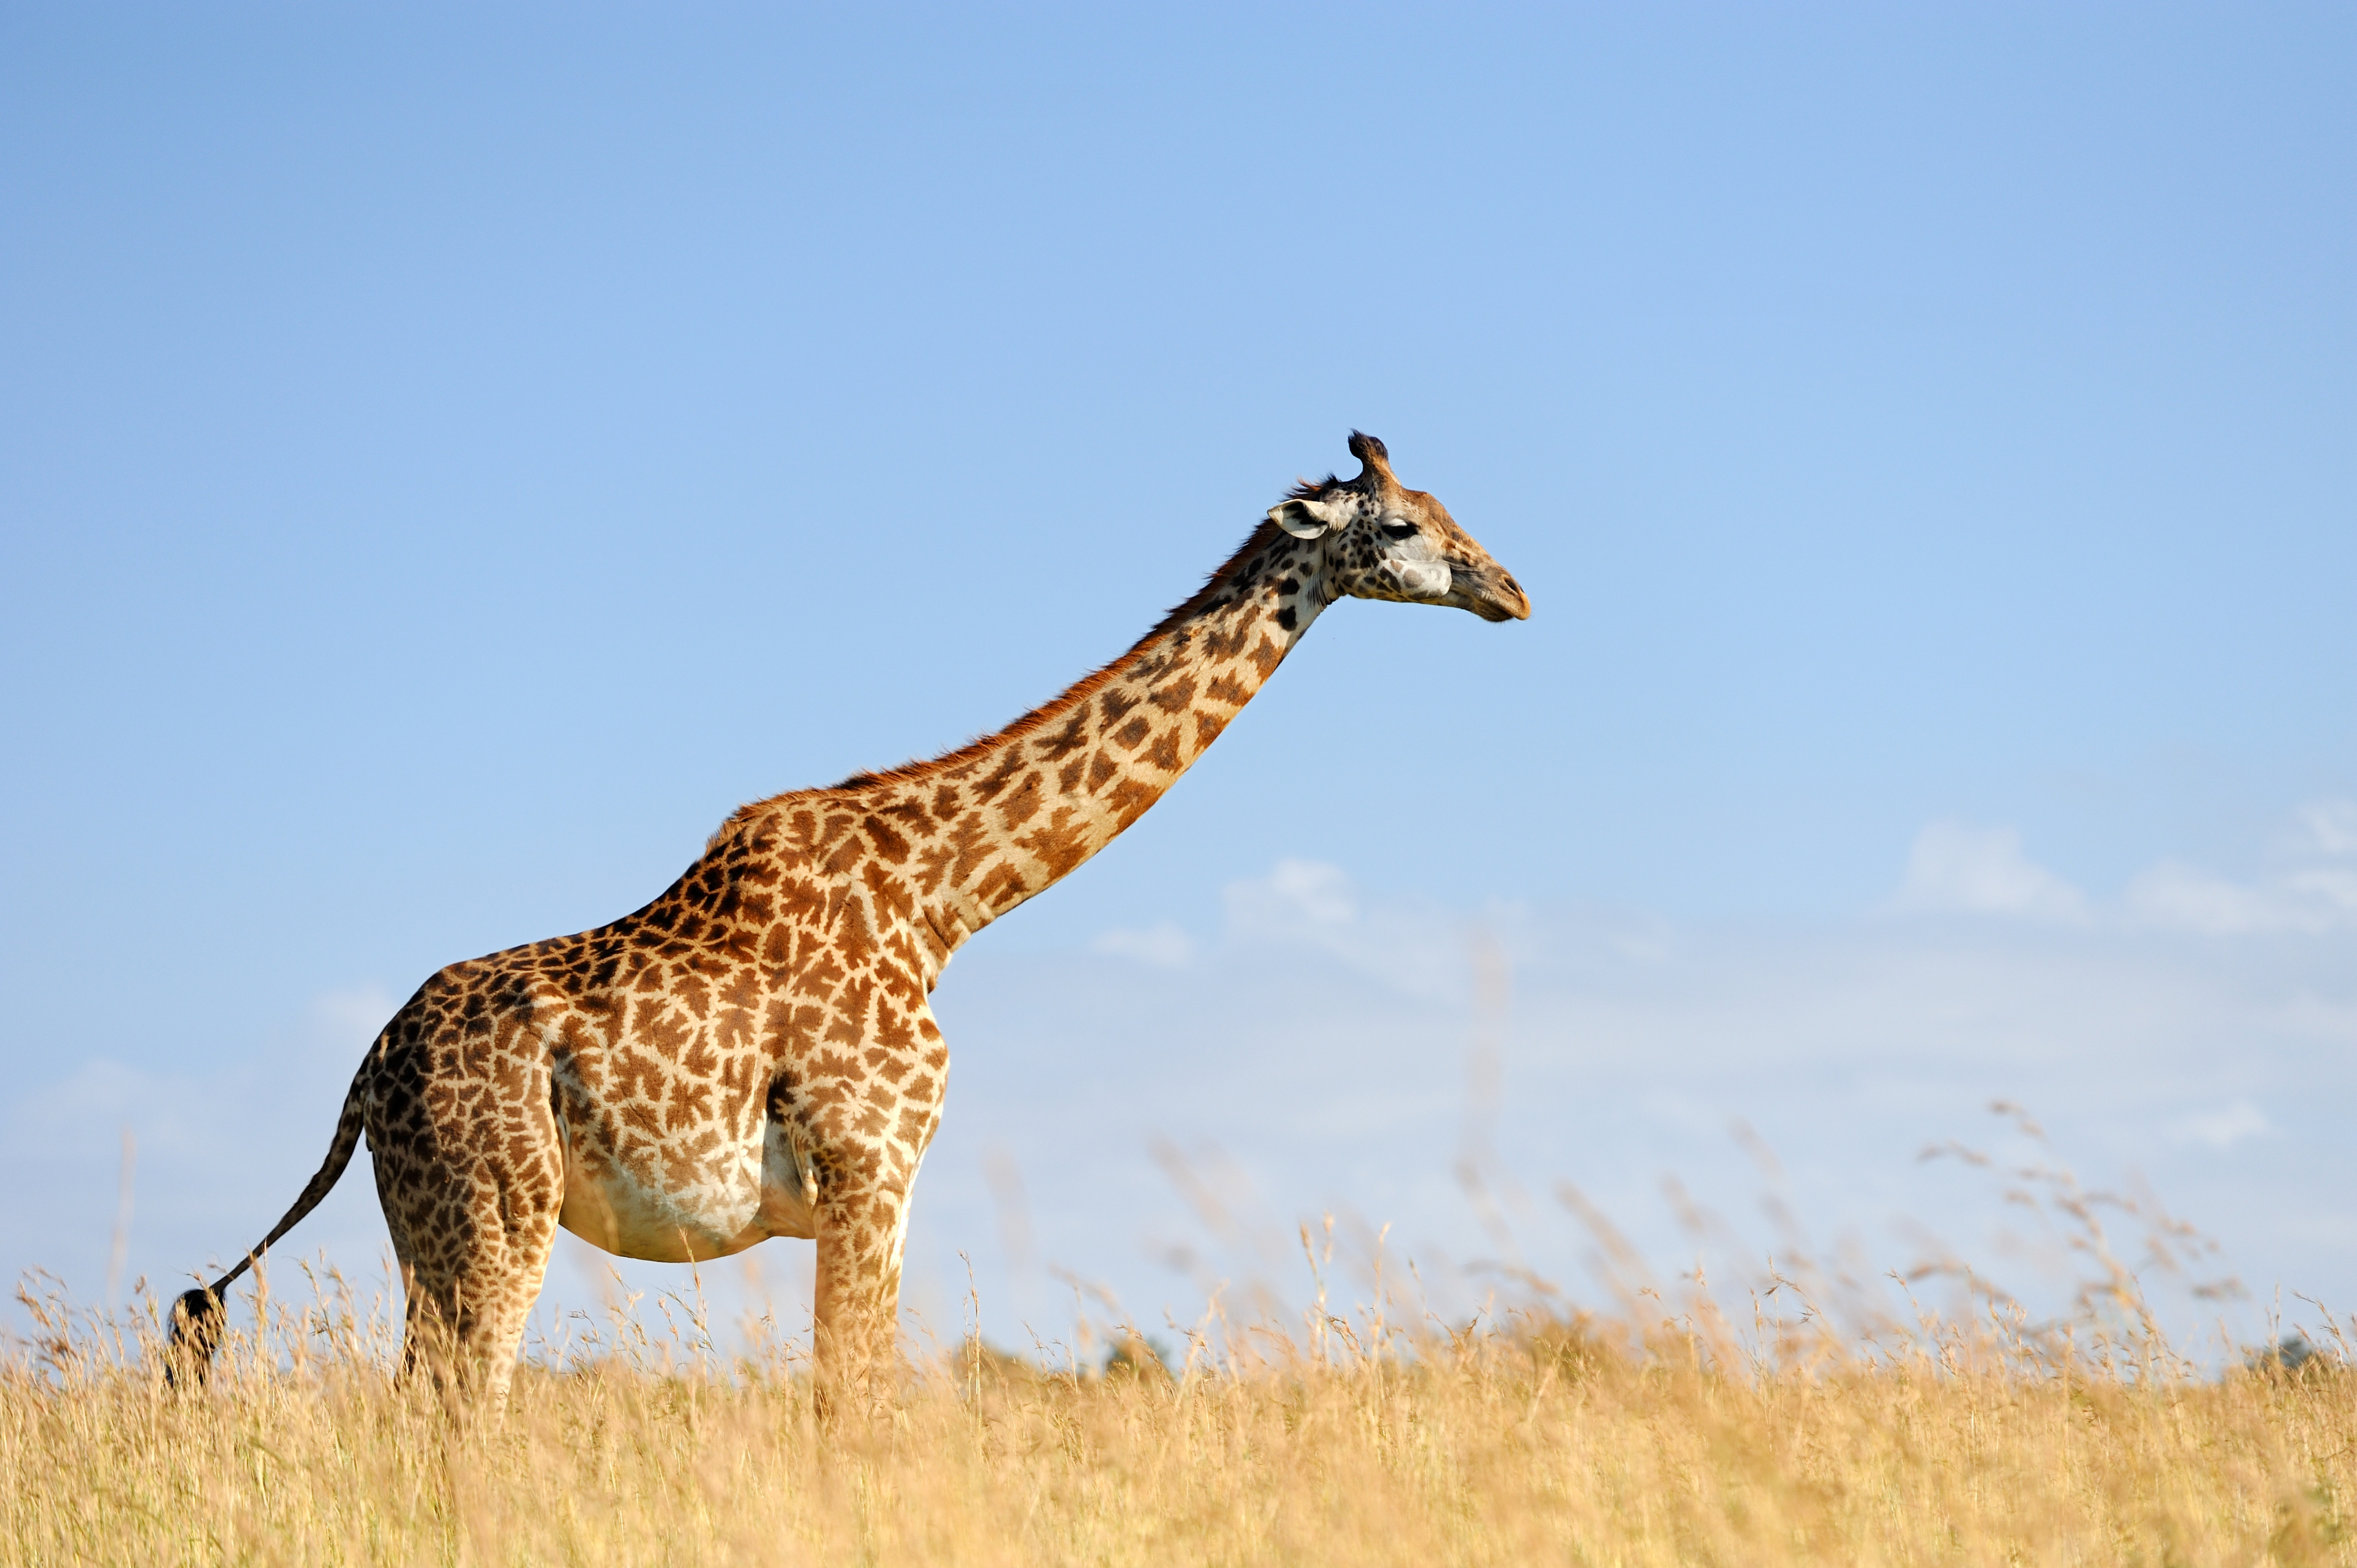 Unveiling the Elegance: The Enigma of the Spotless Giraffe